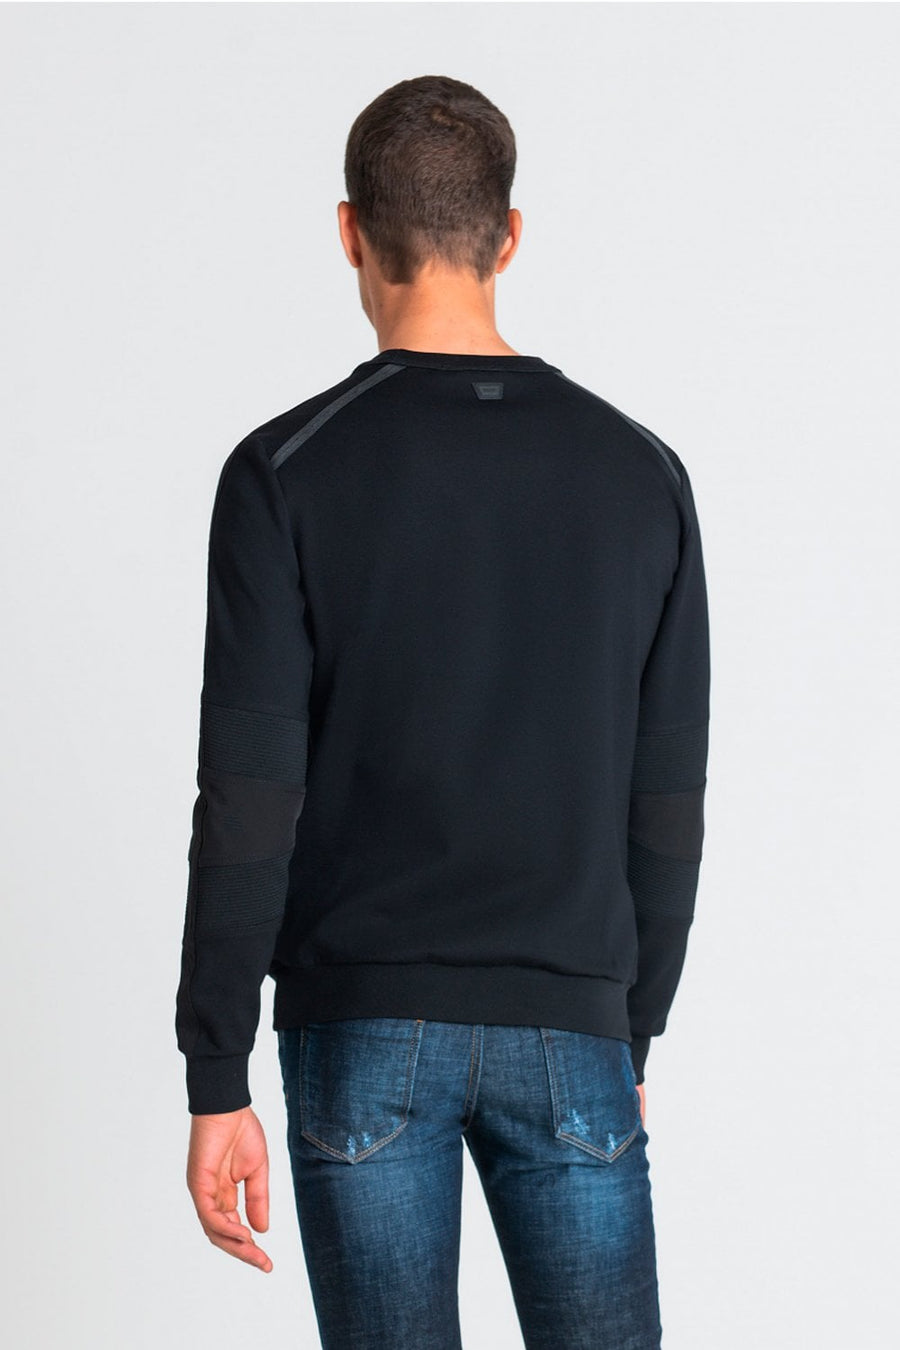 Buy the Antony Morato Slim Fit Sweatshirt in Black at Intro. Spend £50 for free UK delivery. Official stockists. We ship worldwide.